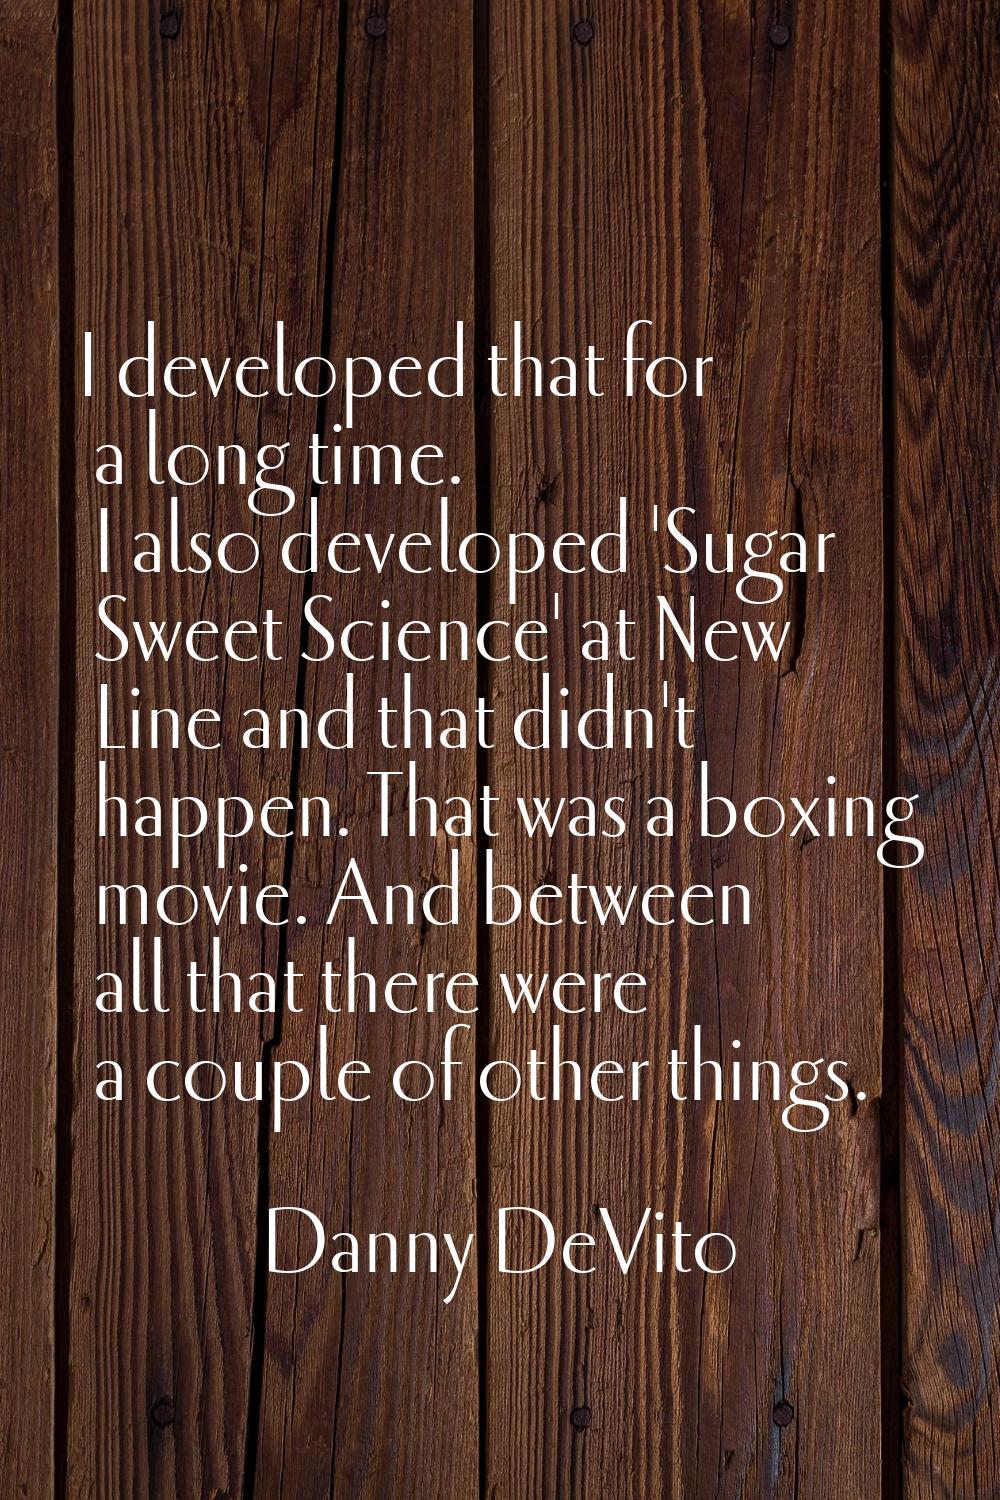 I developed that for a long time. I also developed 'Sugar Sweet Science' at New Line and that didn'